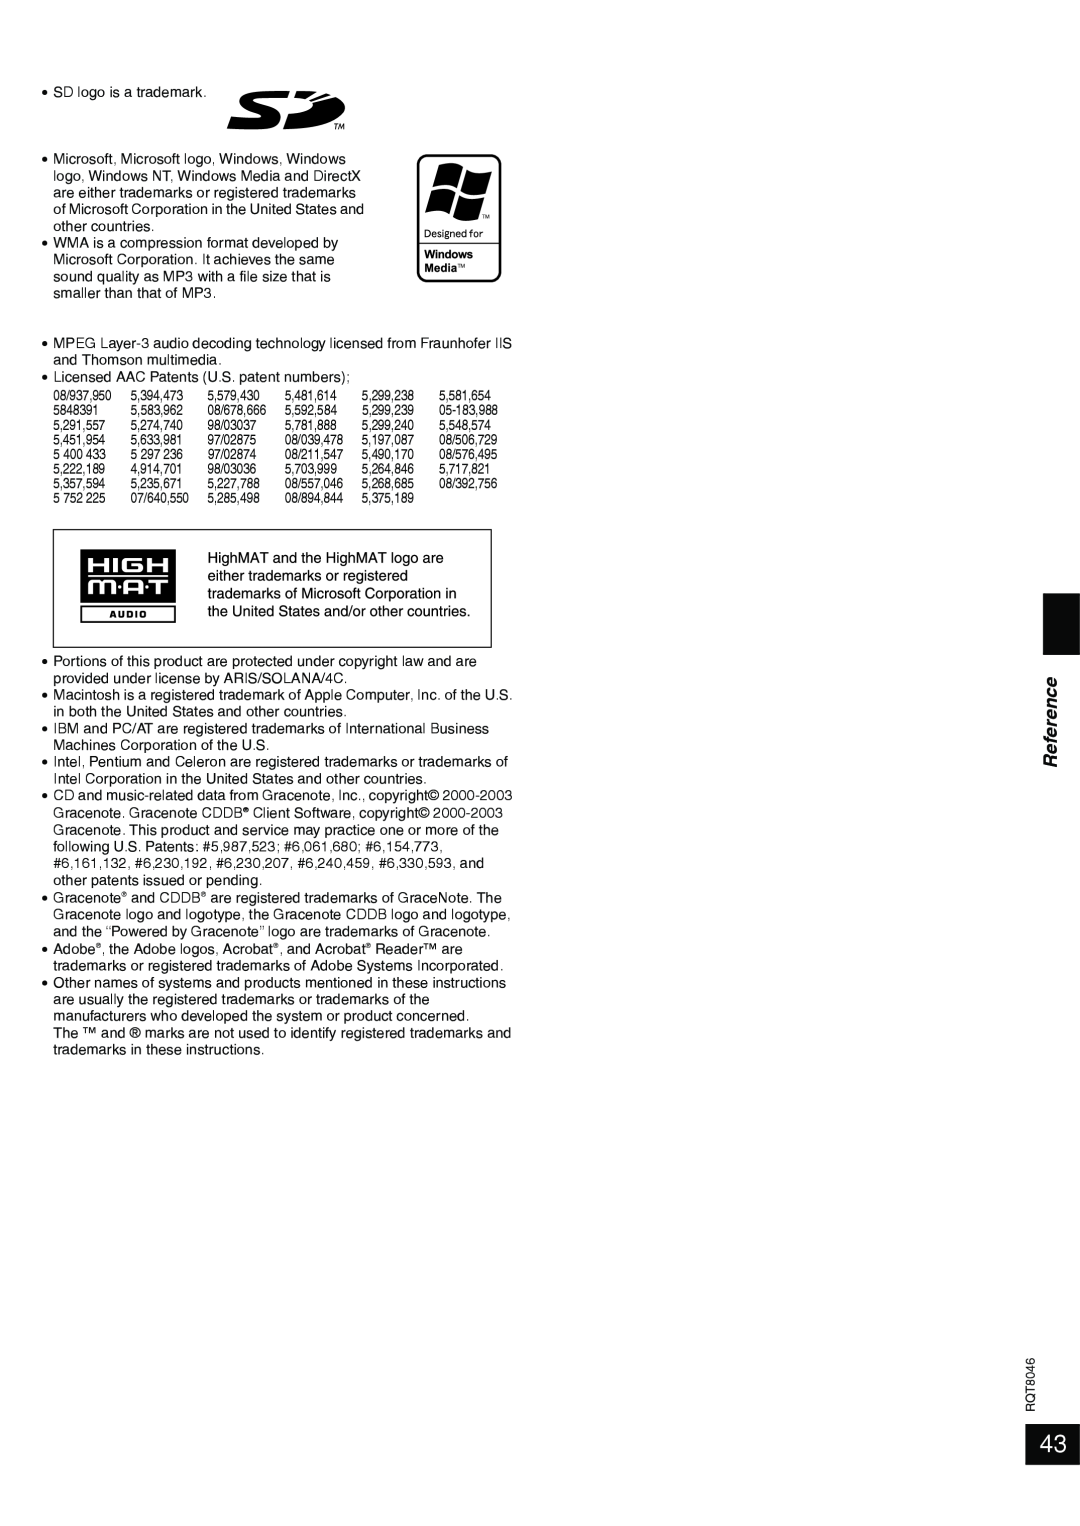 Panasonic SC-PM71SD manual Reference, SD logo is a trademark 